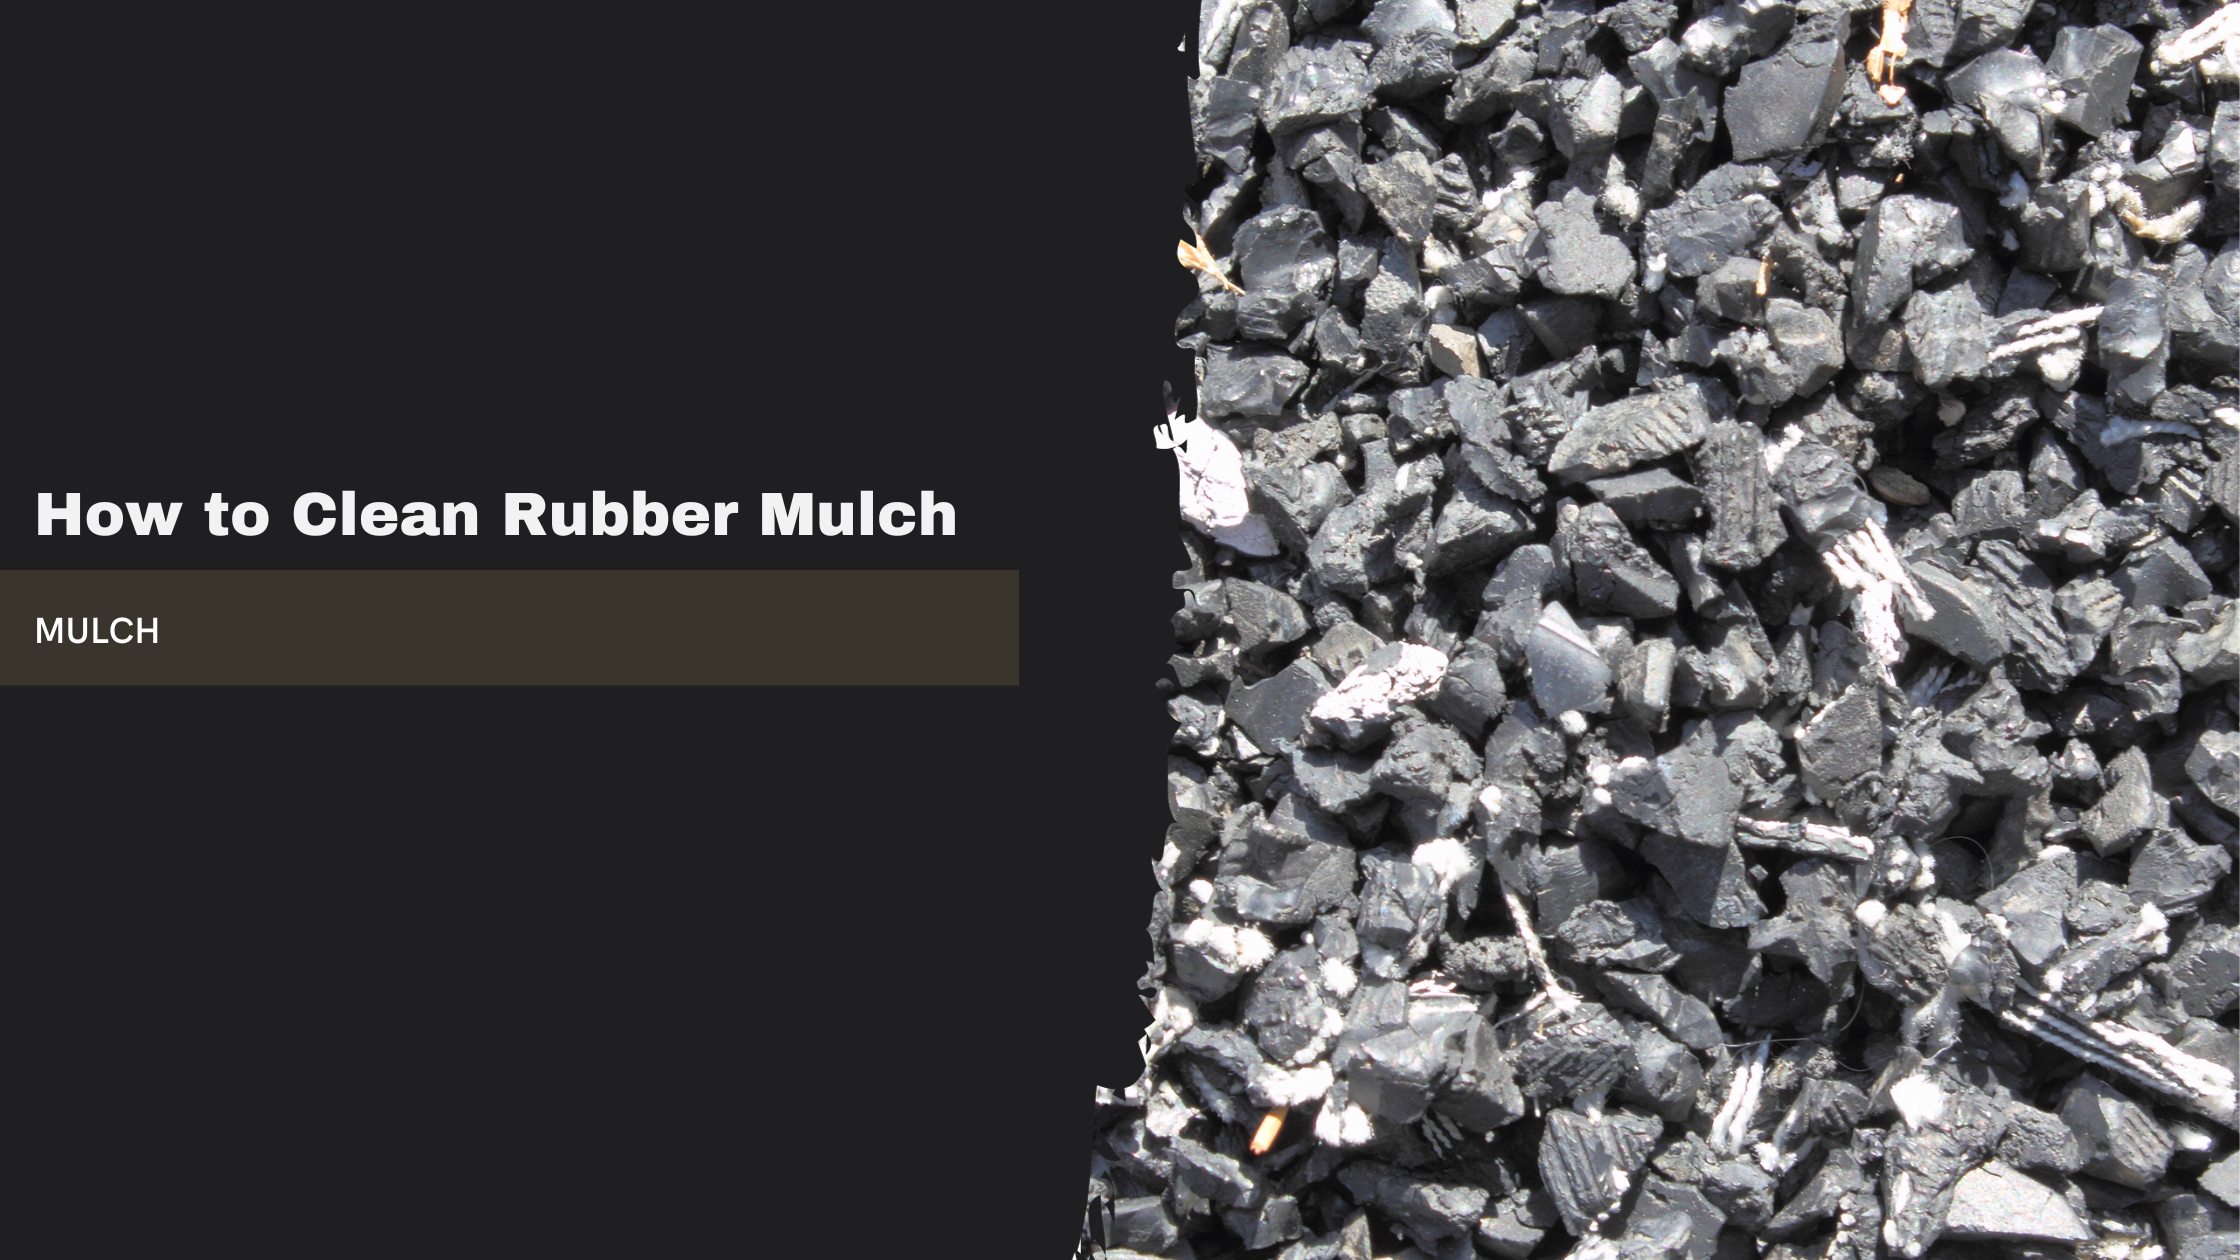 How to Clean Rubber Mulch